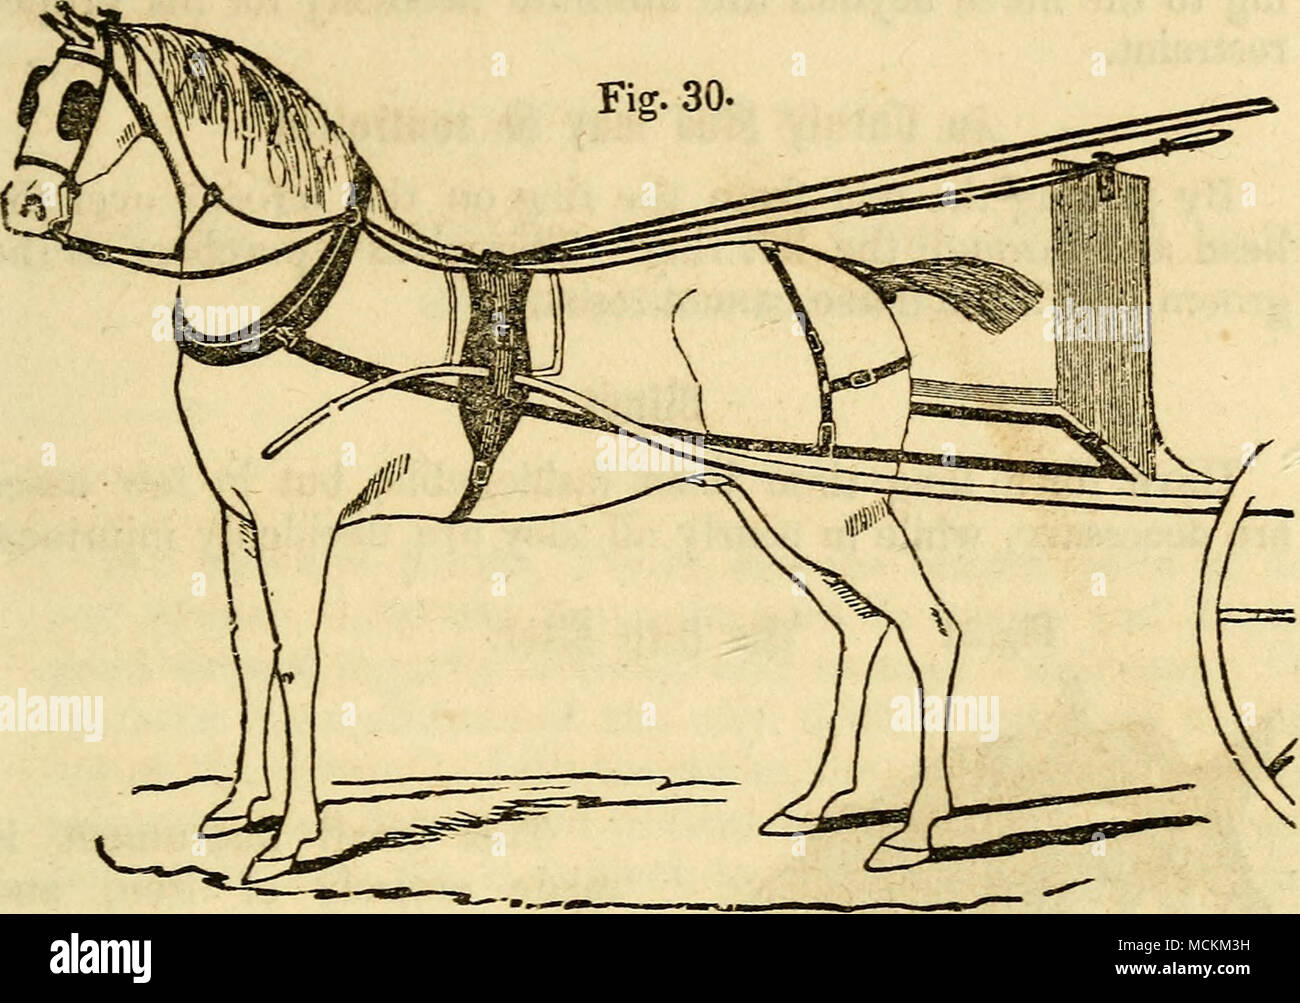 . Saf-ty Rein illustrated. Directions for use of Safety Rein.—In putting on the rein for a gig, keep the buckle to the left hand, or near side; that will place the loop, which is on the middle of the rein, below the hook or head of the bridle, which prevents it from being thrown out by the motion of the horse's head. For a pair of horses, keep the two short chapes outmost, and the loops on the middle downward. For saddle, keep the buckle to the left hand. When the rein is used either for running, rearing, kicking, or going backward, it should be applied suddenly with a strong arm, keeping up t Stock Photo